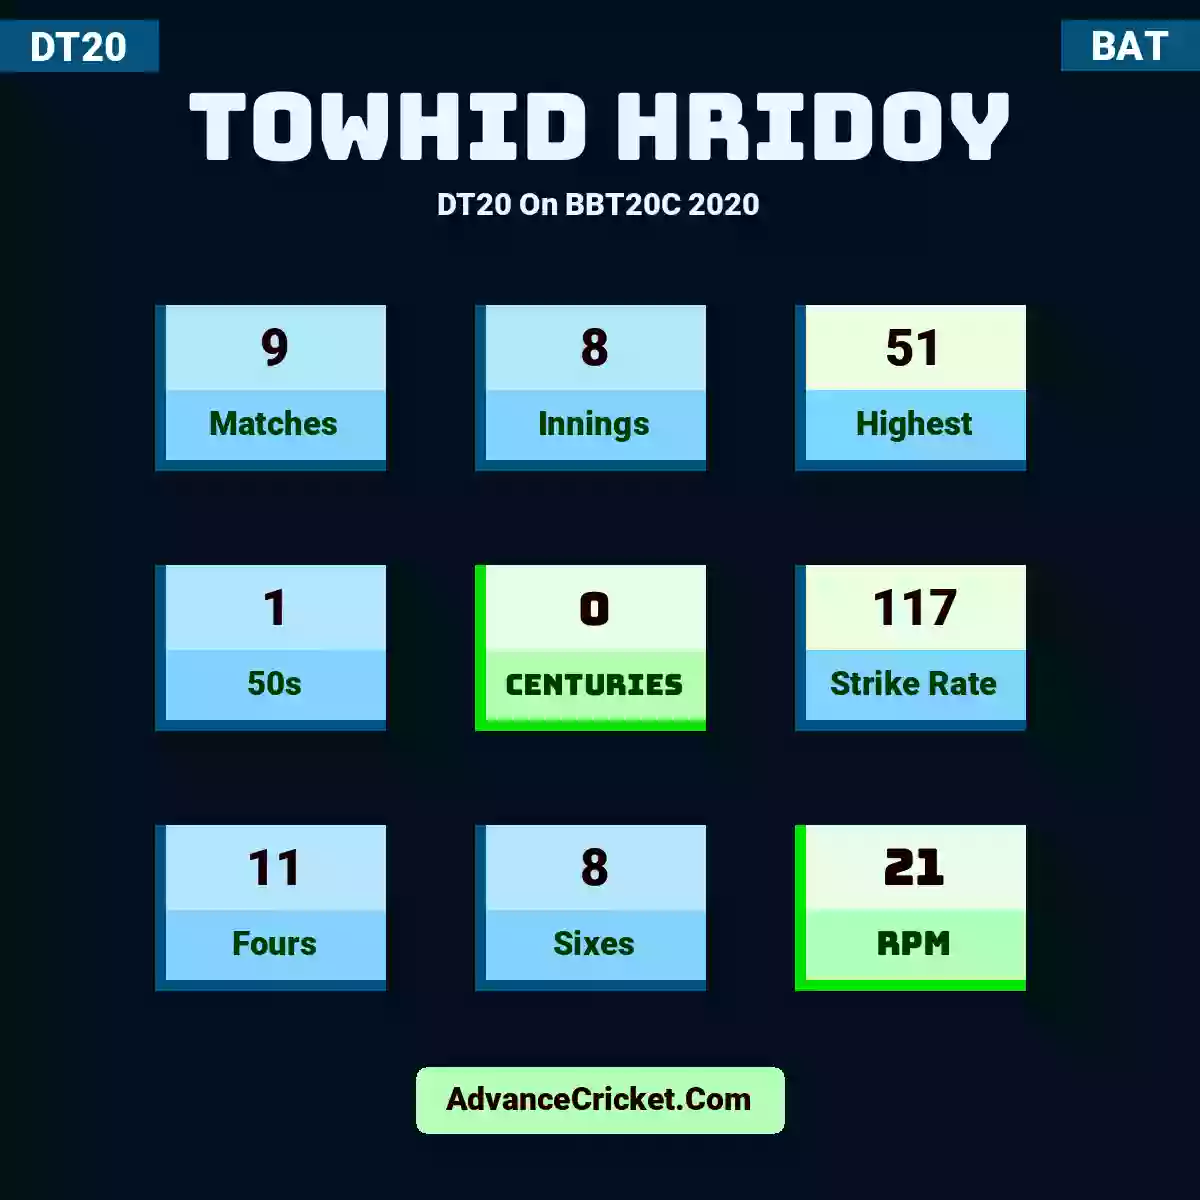 Towhid Hridoy DT20  On BBT20C 2020, Towhid Hridoy played 9 matches, scored 51 runs as highest, 1 half-centuries, and 0 centuries, with a strike rate of 117. T.Hridoy hit 11 fours and 8 sixes, with an RPM of 21.